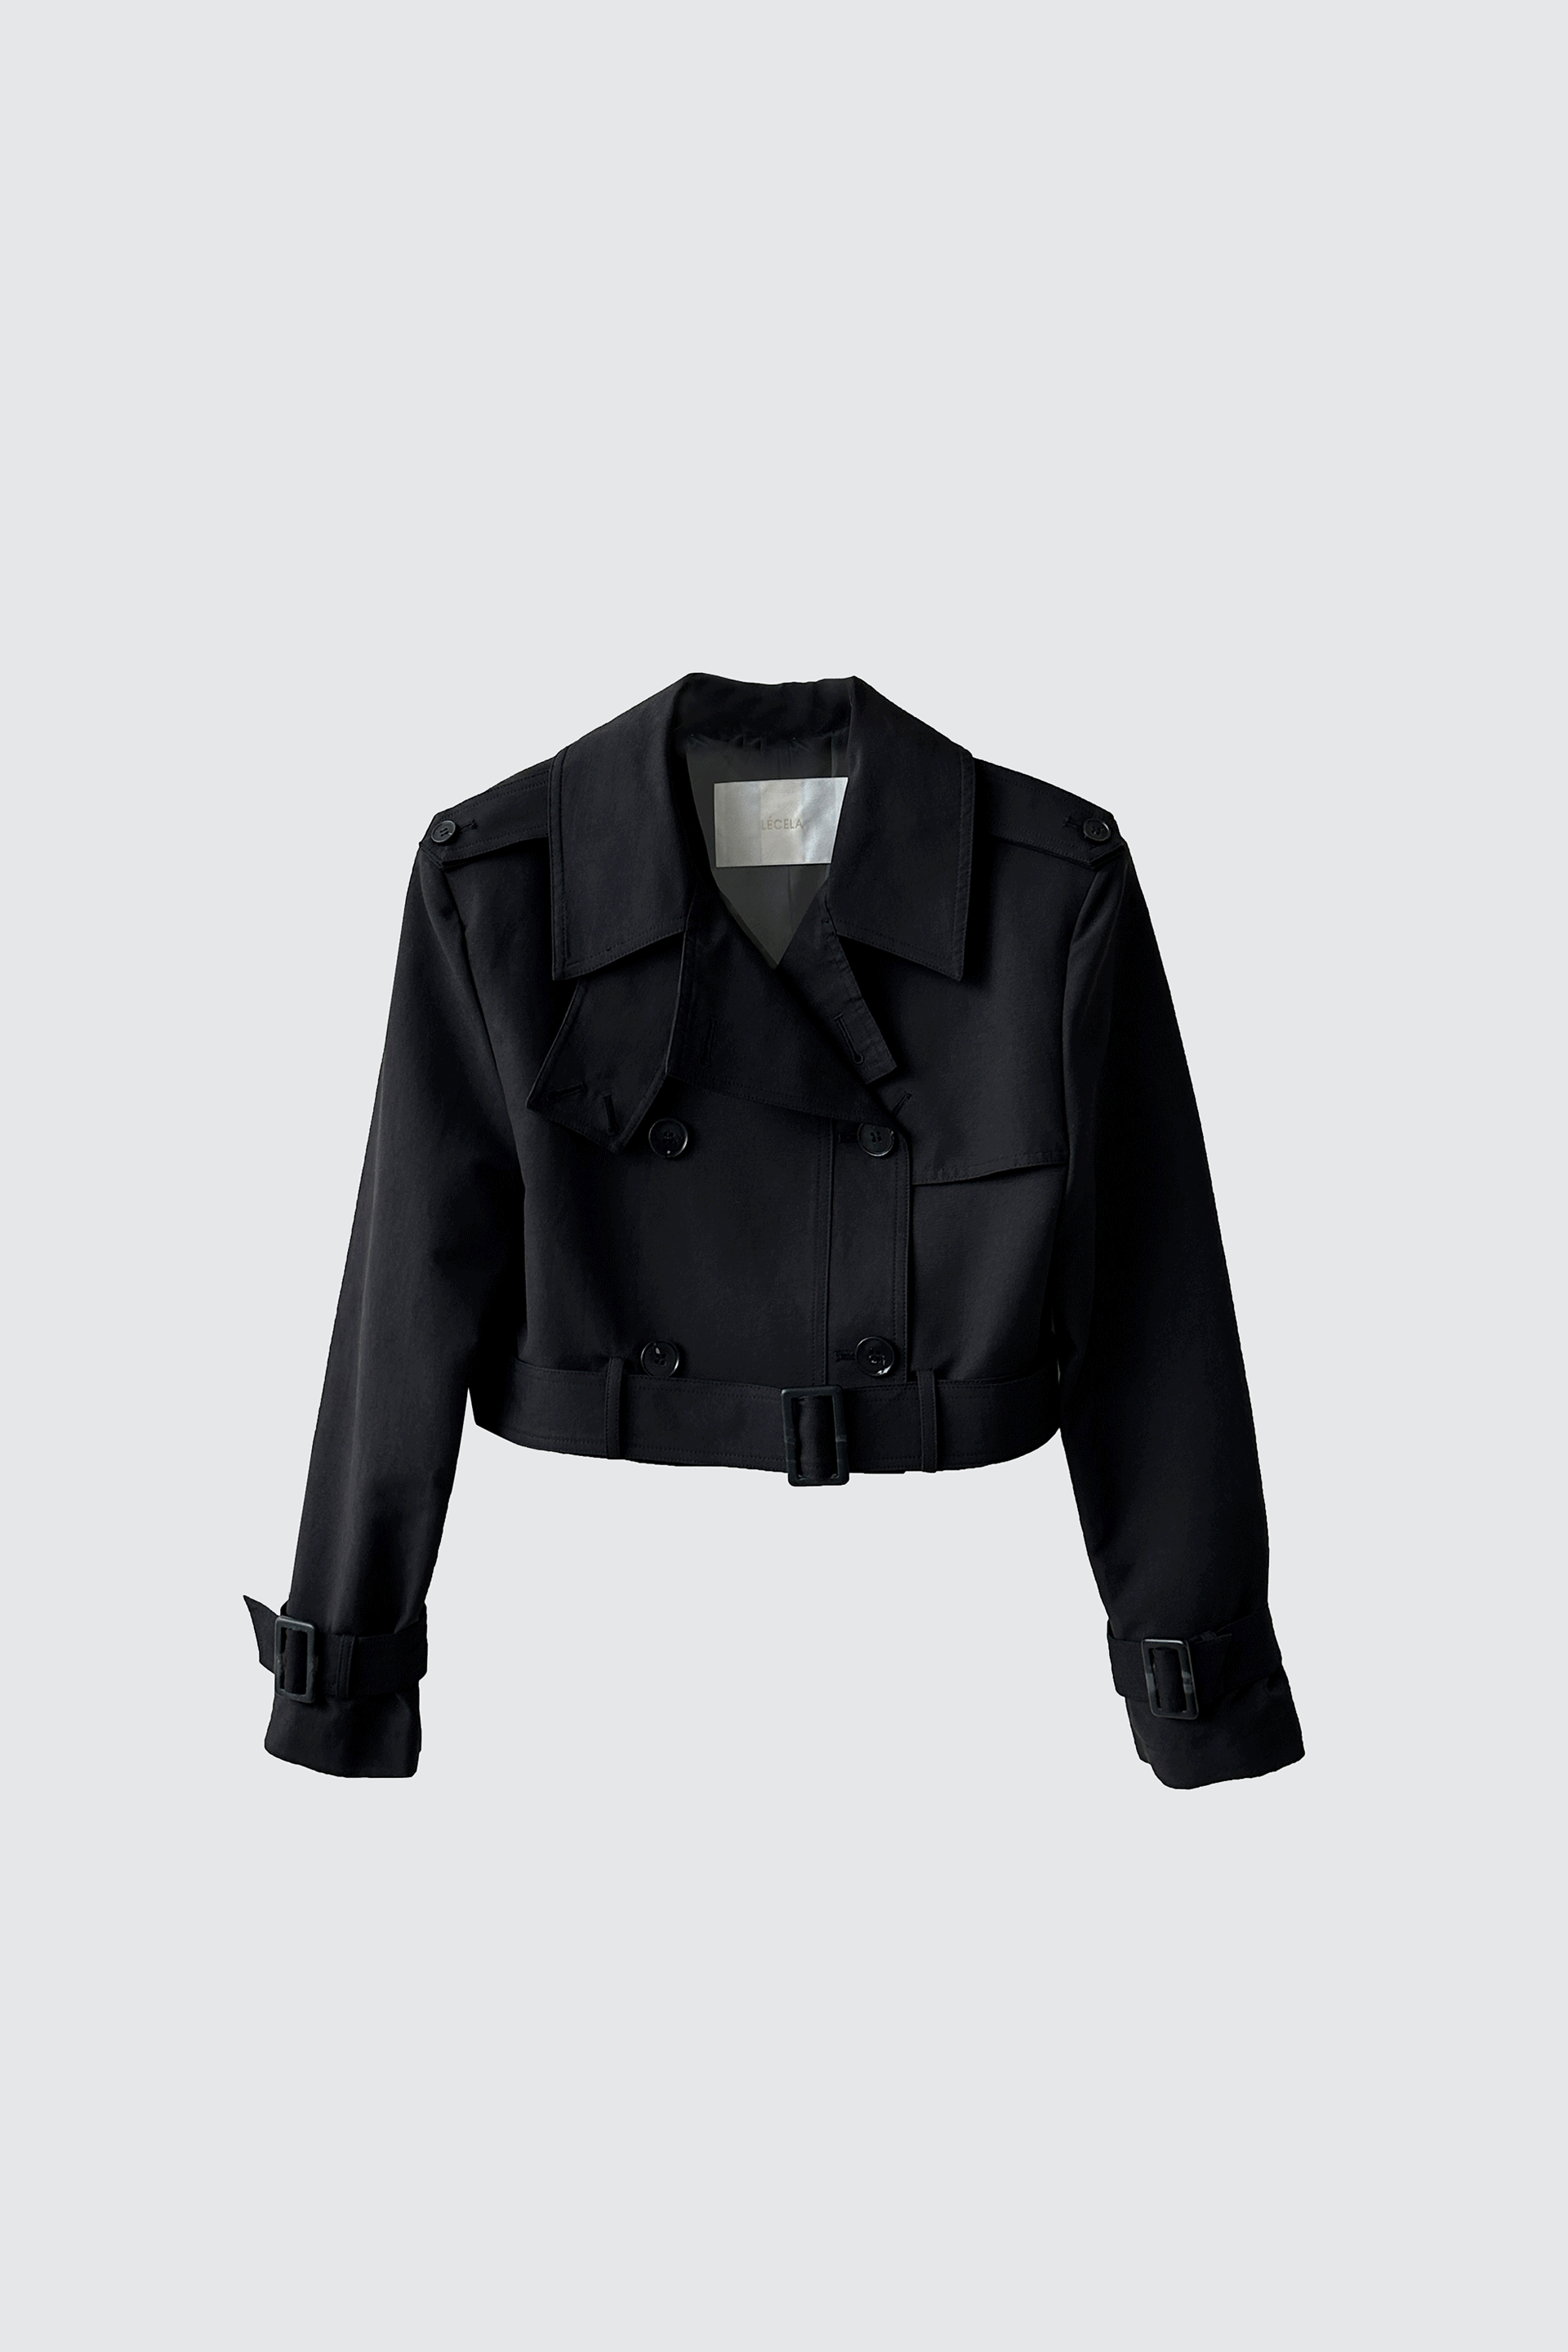 [MADE] TRENCH JACKET(BLACK)당일발송